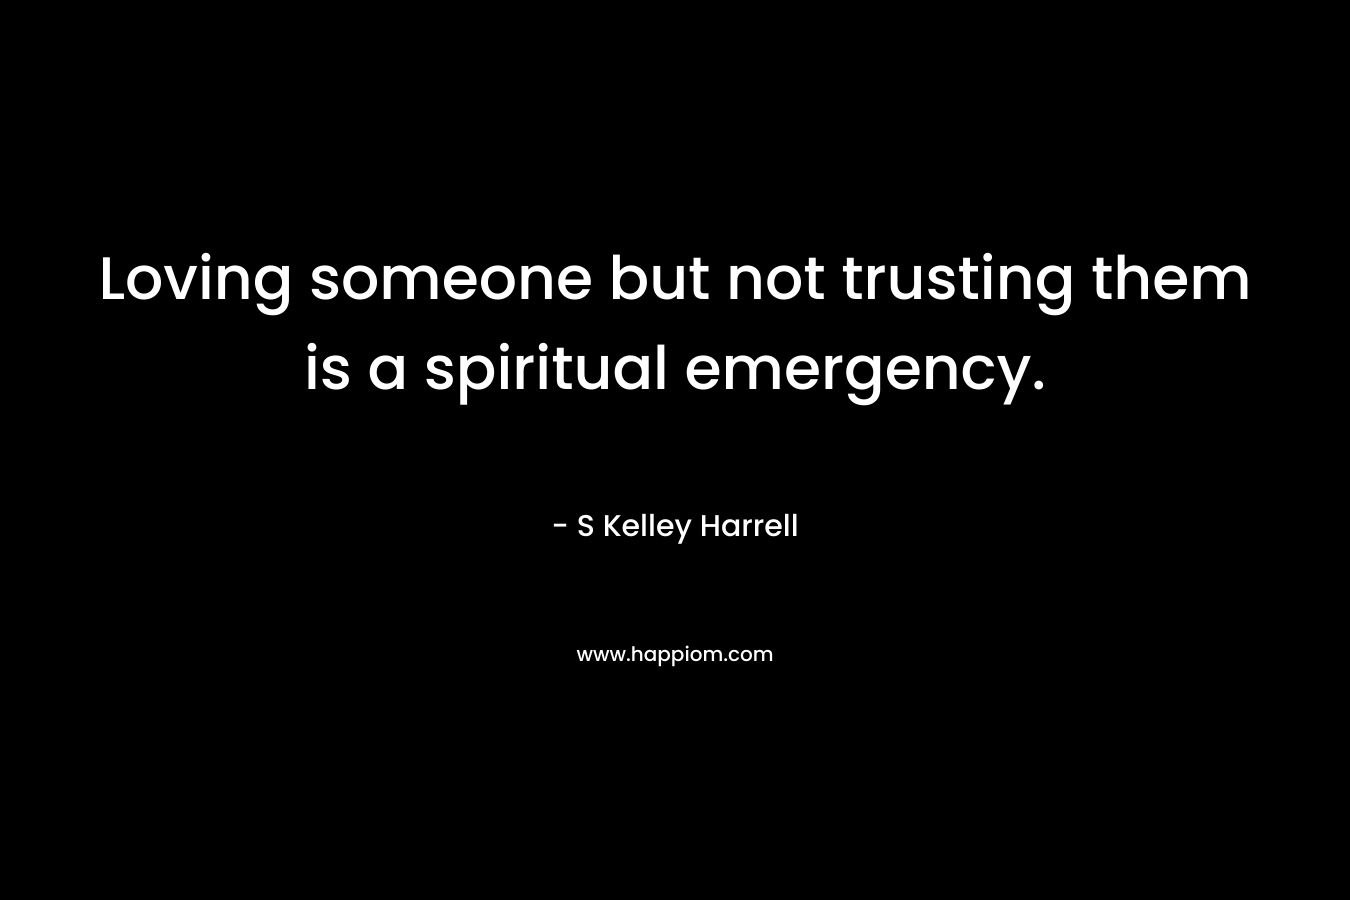 Loving someone but not trusting them is a spiritual emergency. – S Kelley Harrell